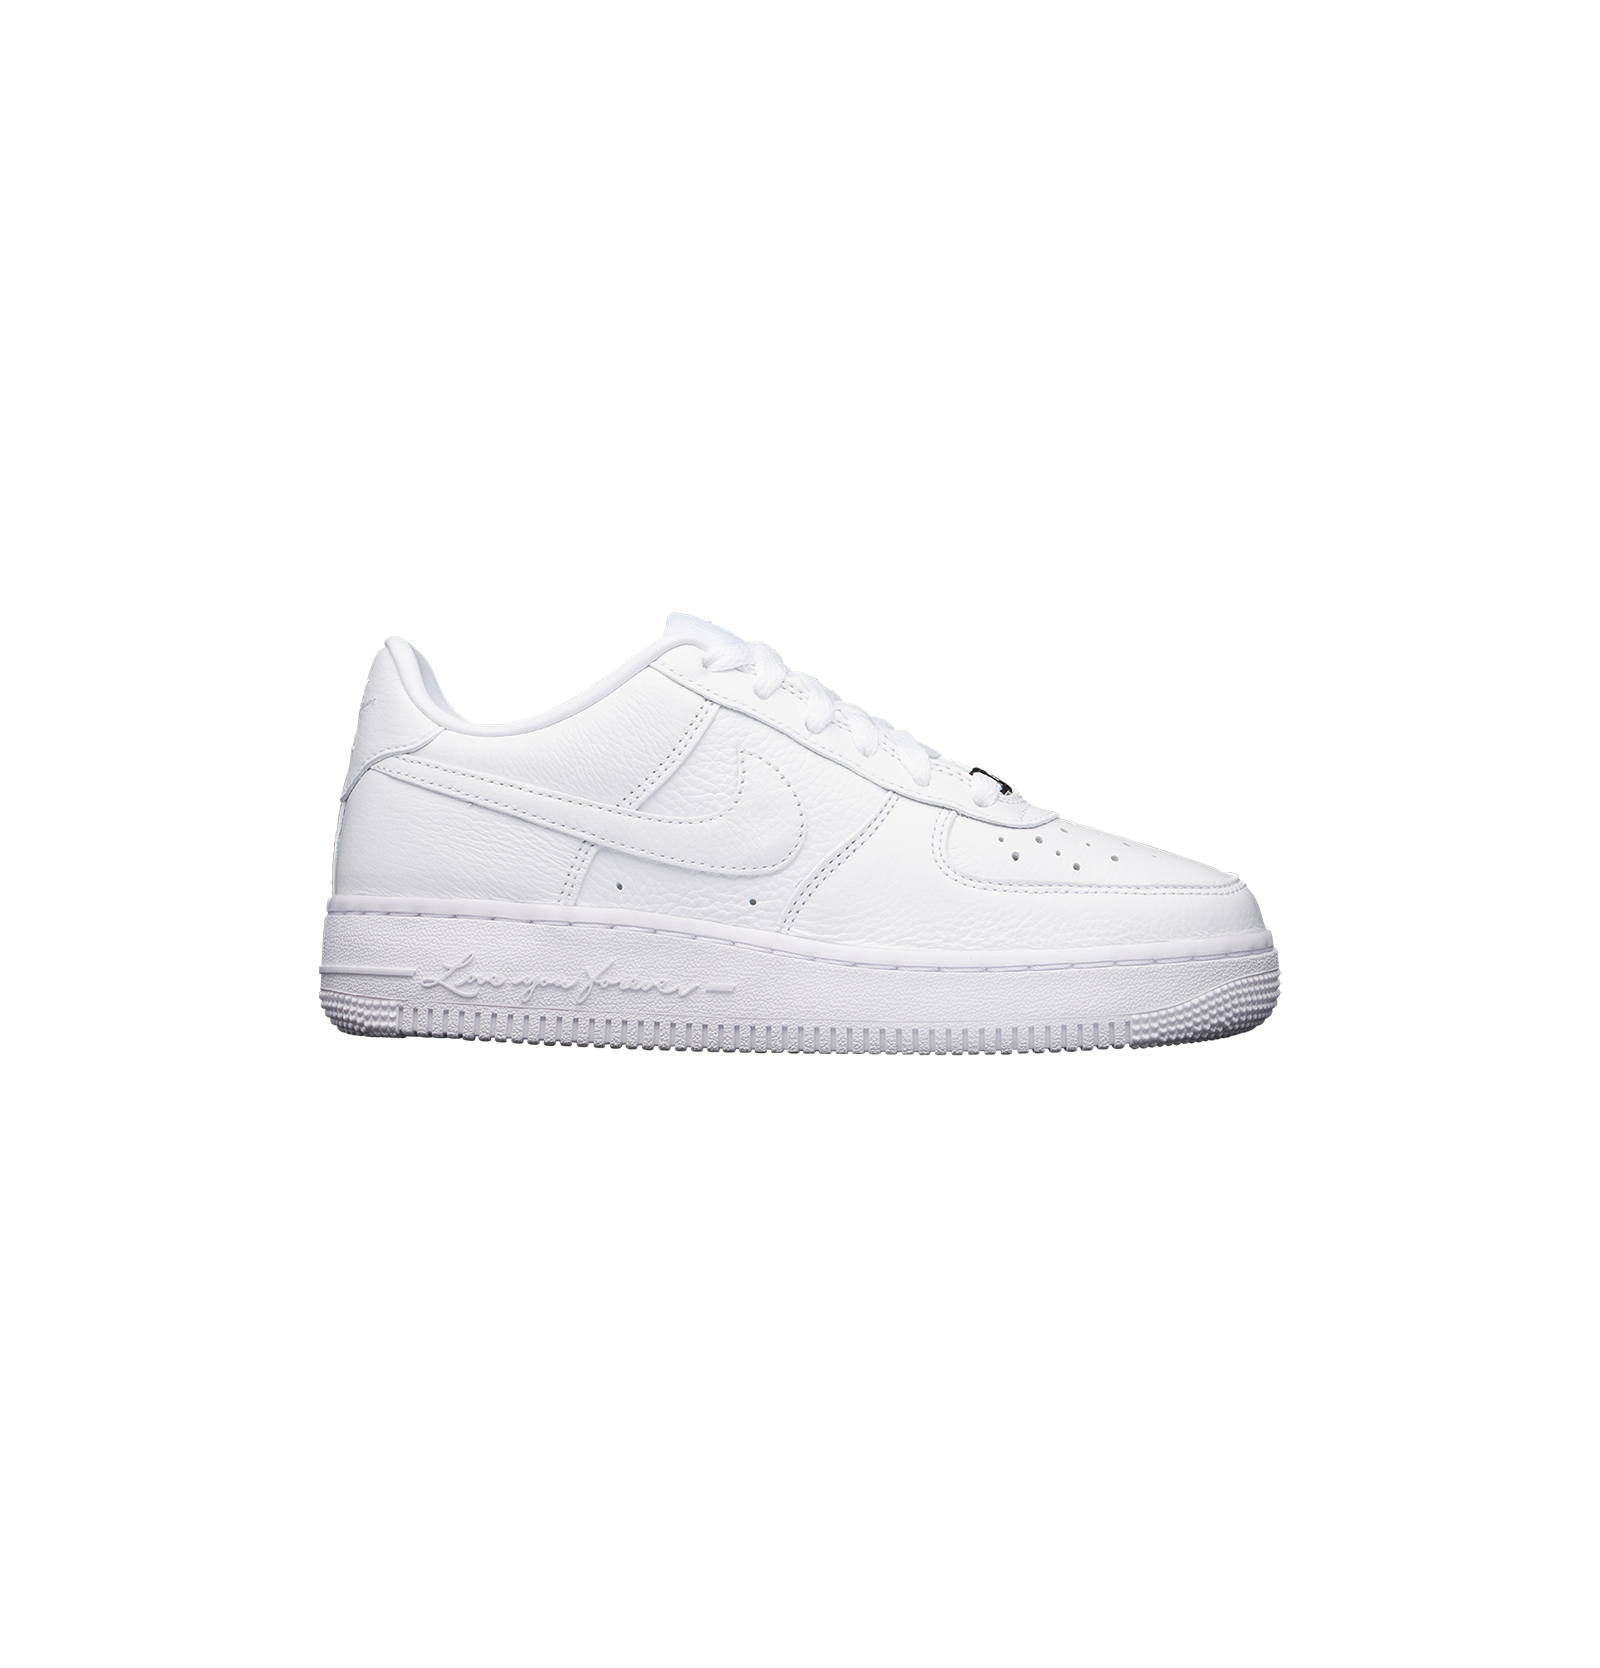 LOVE YOU FOREVER AIR FORCE 1 - LITTLE KIDS - IMAGE 6